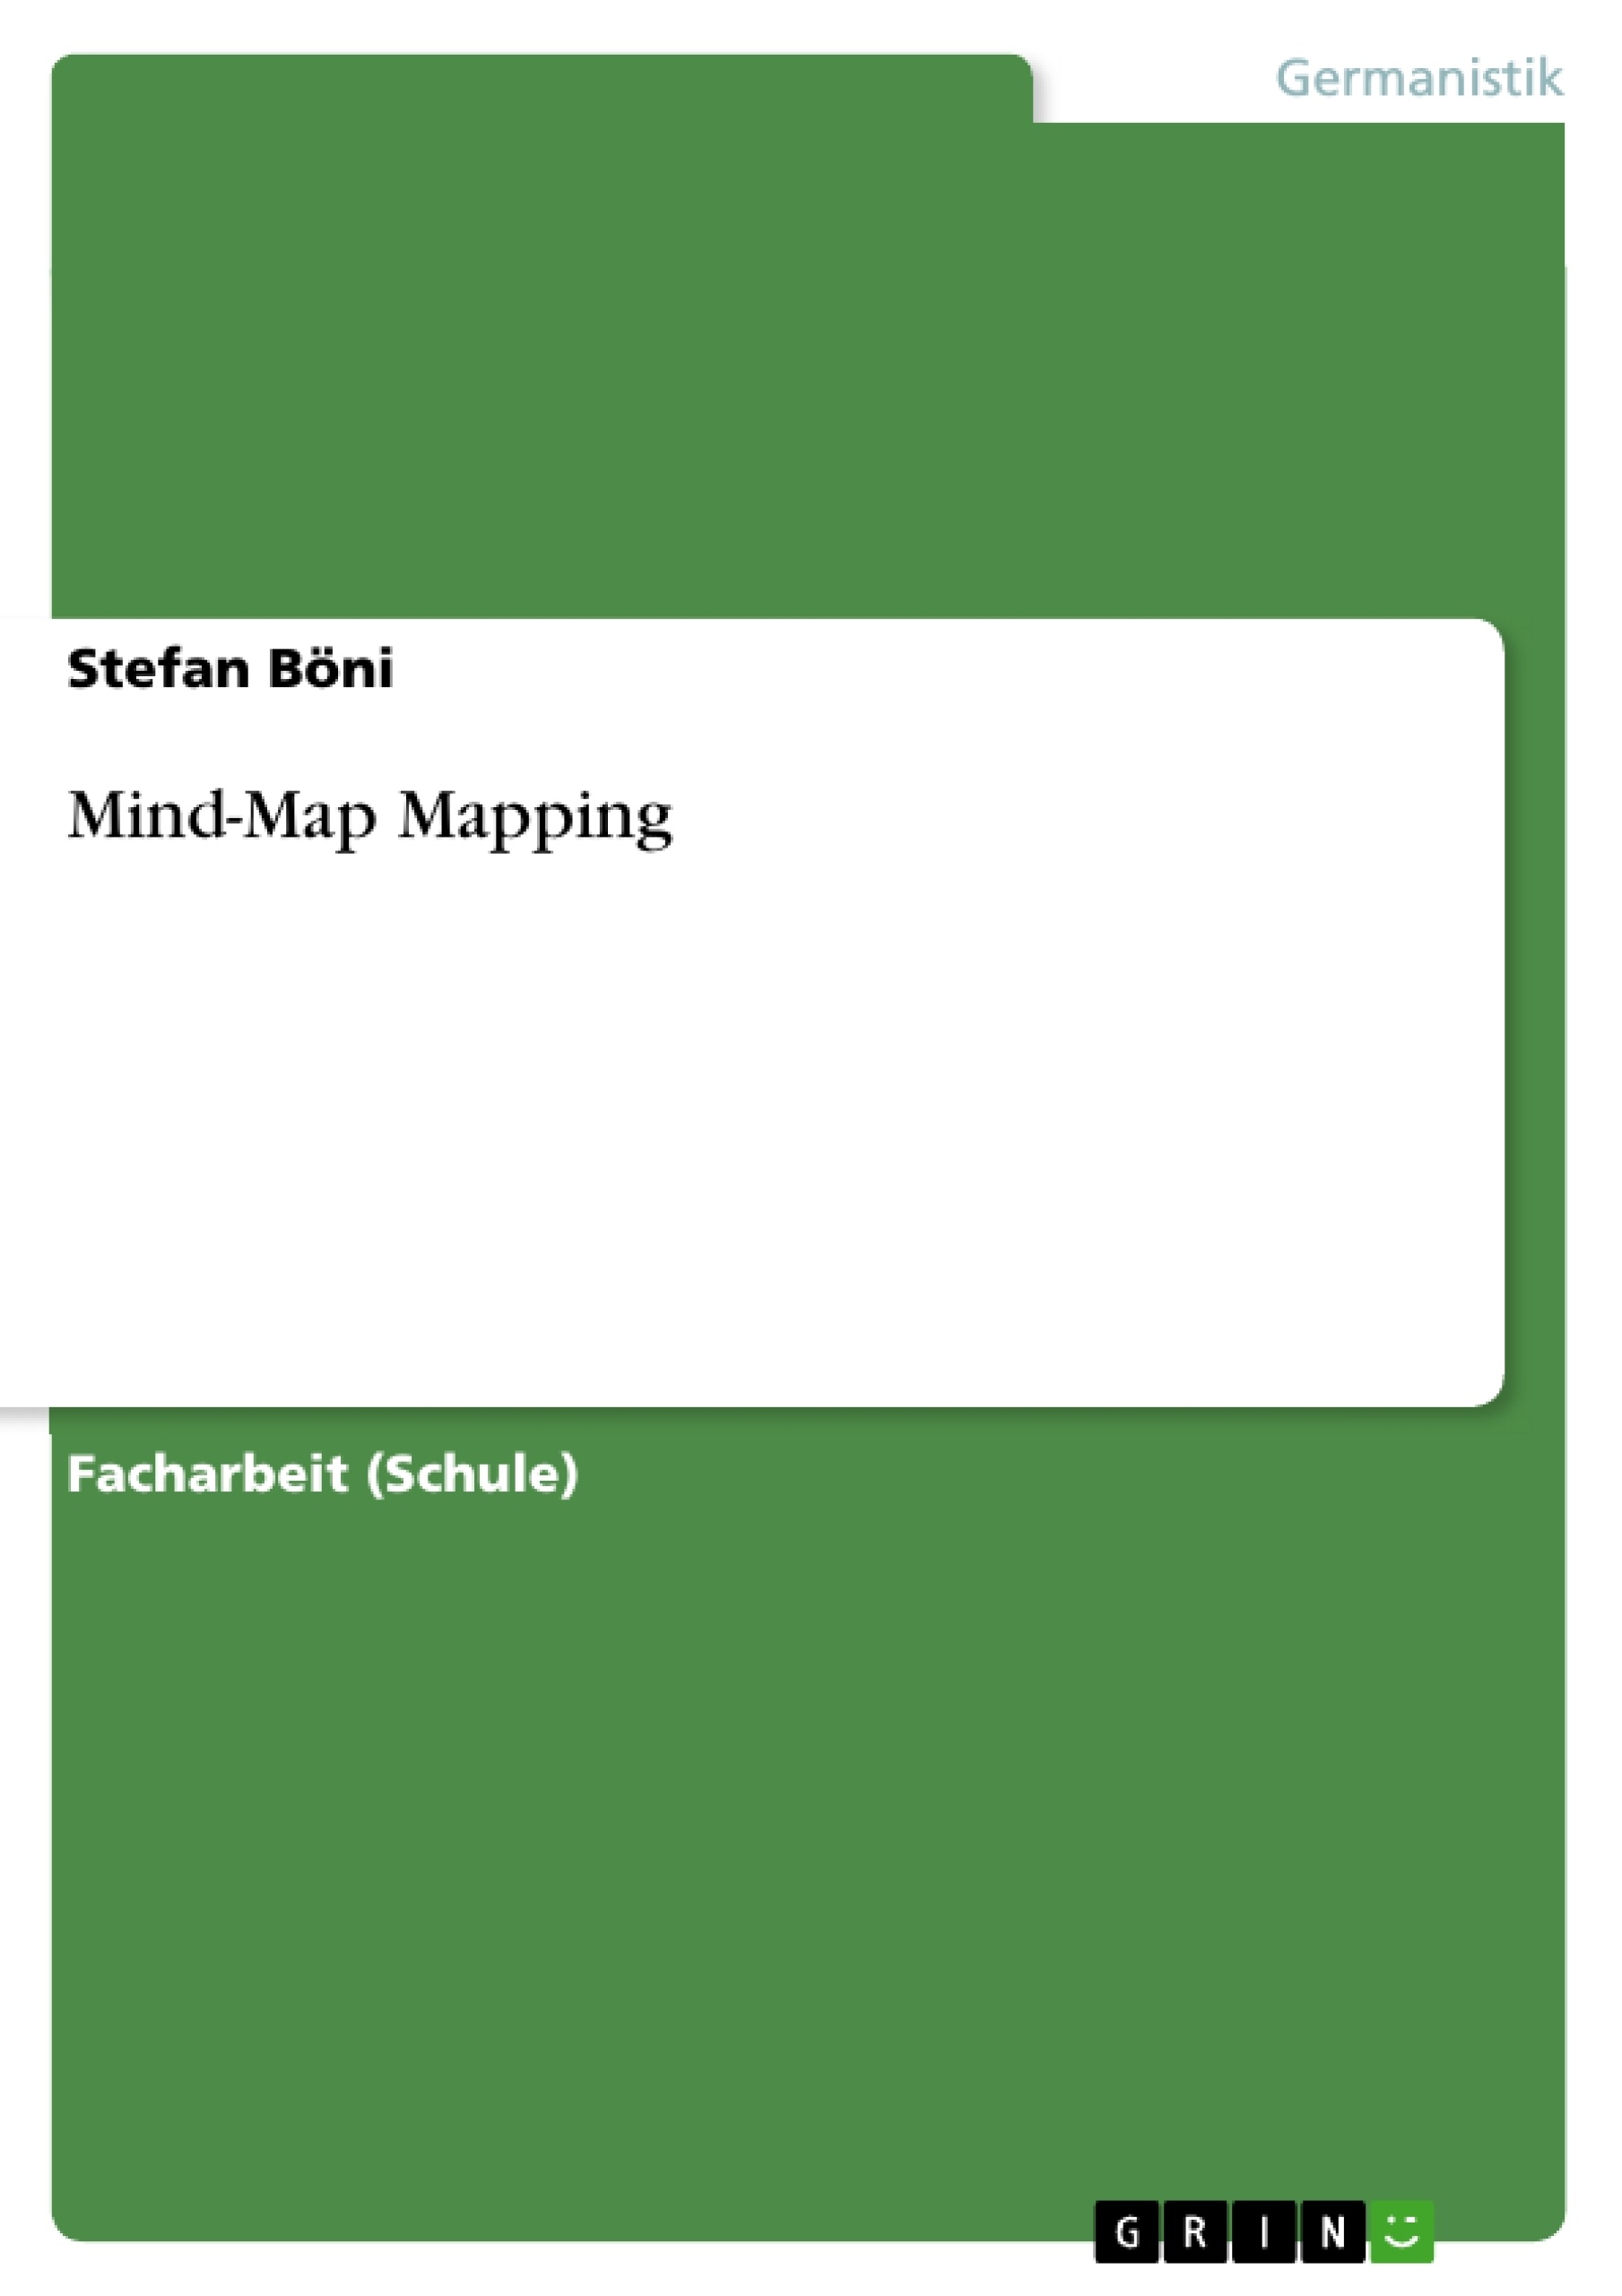 Título: Mind-Map Mapping